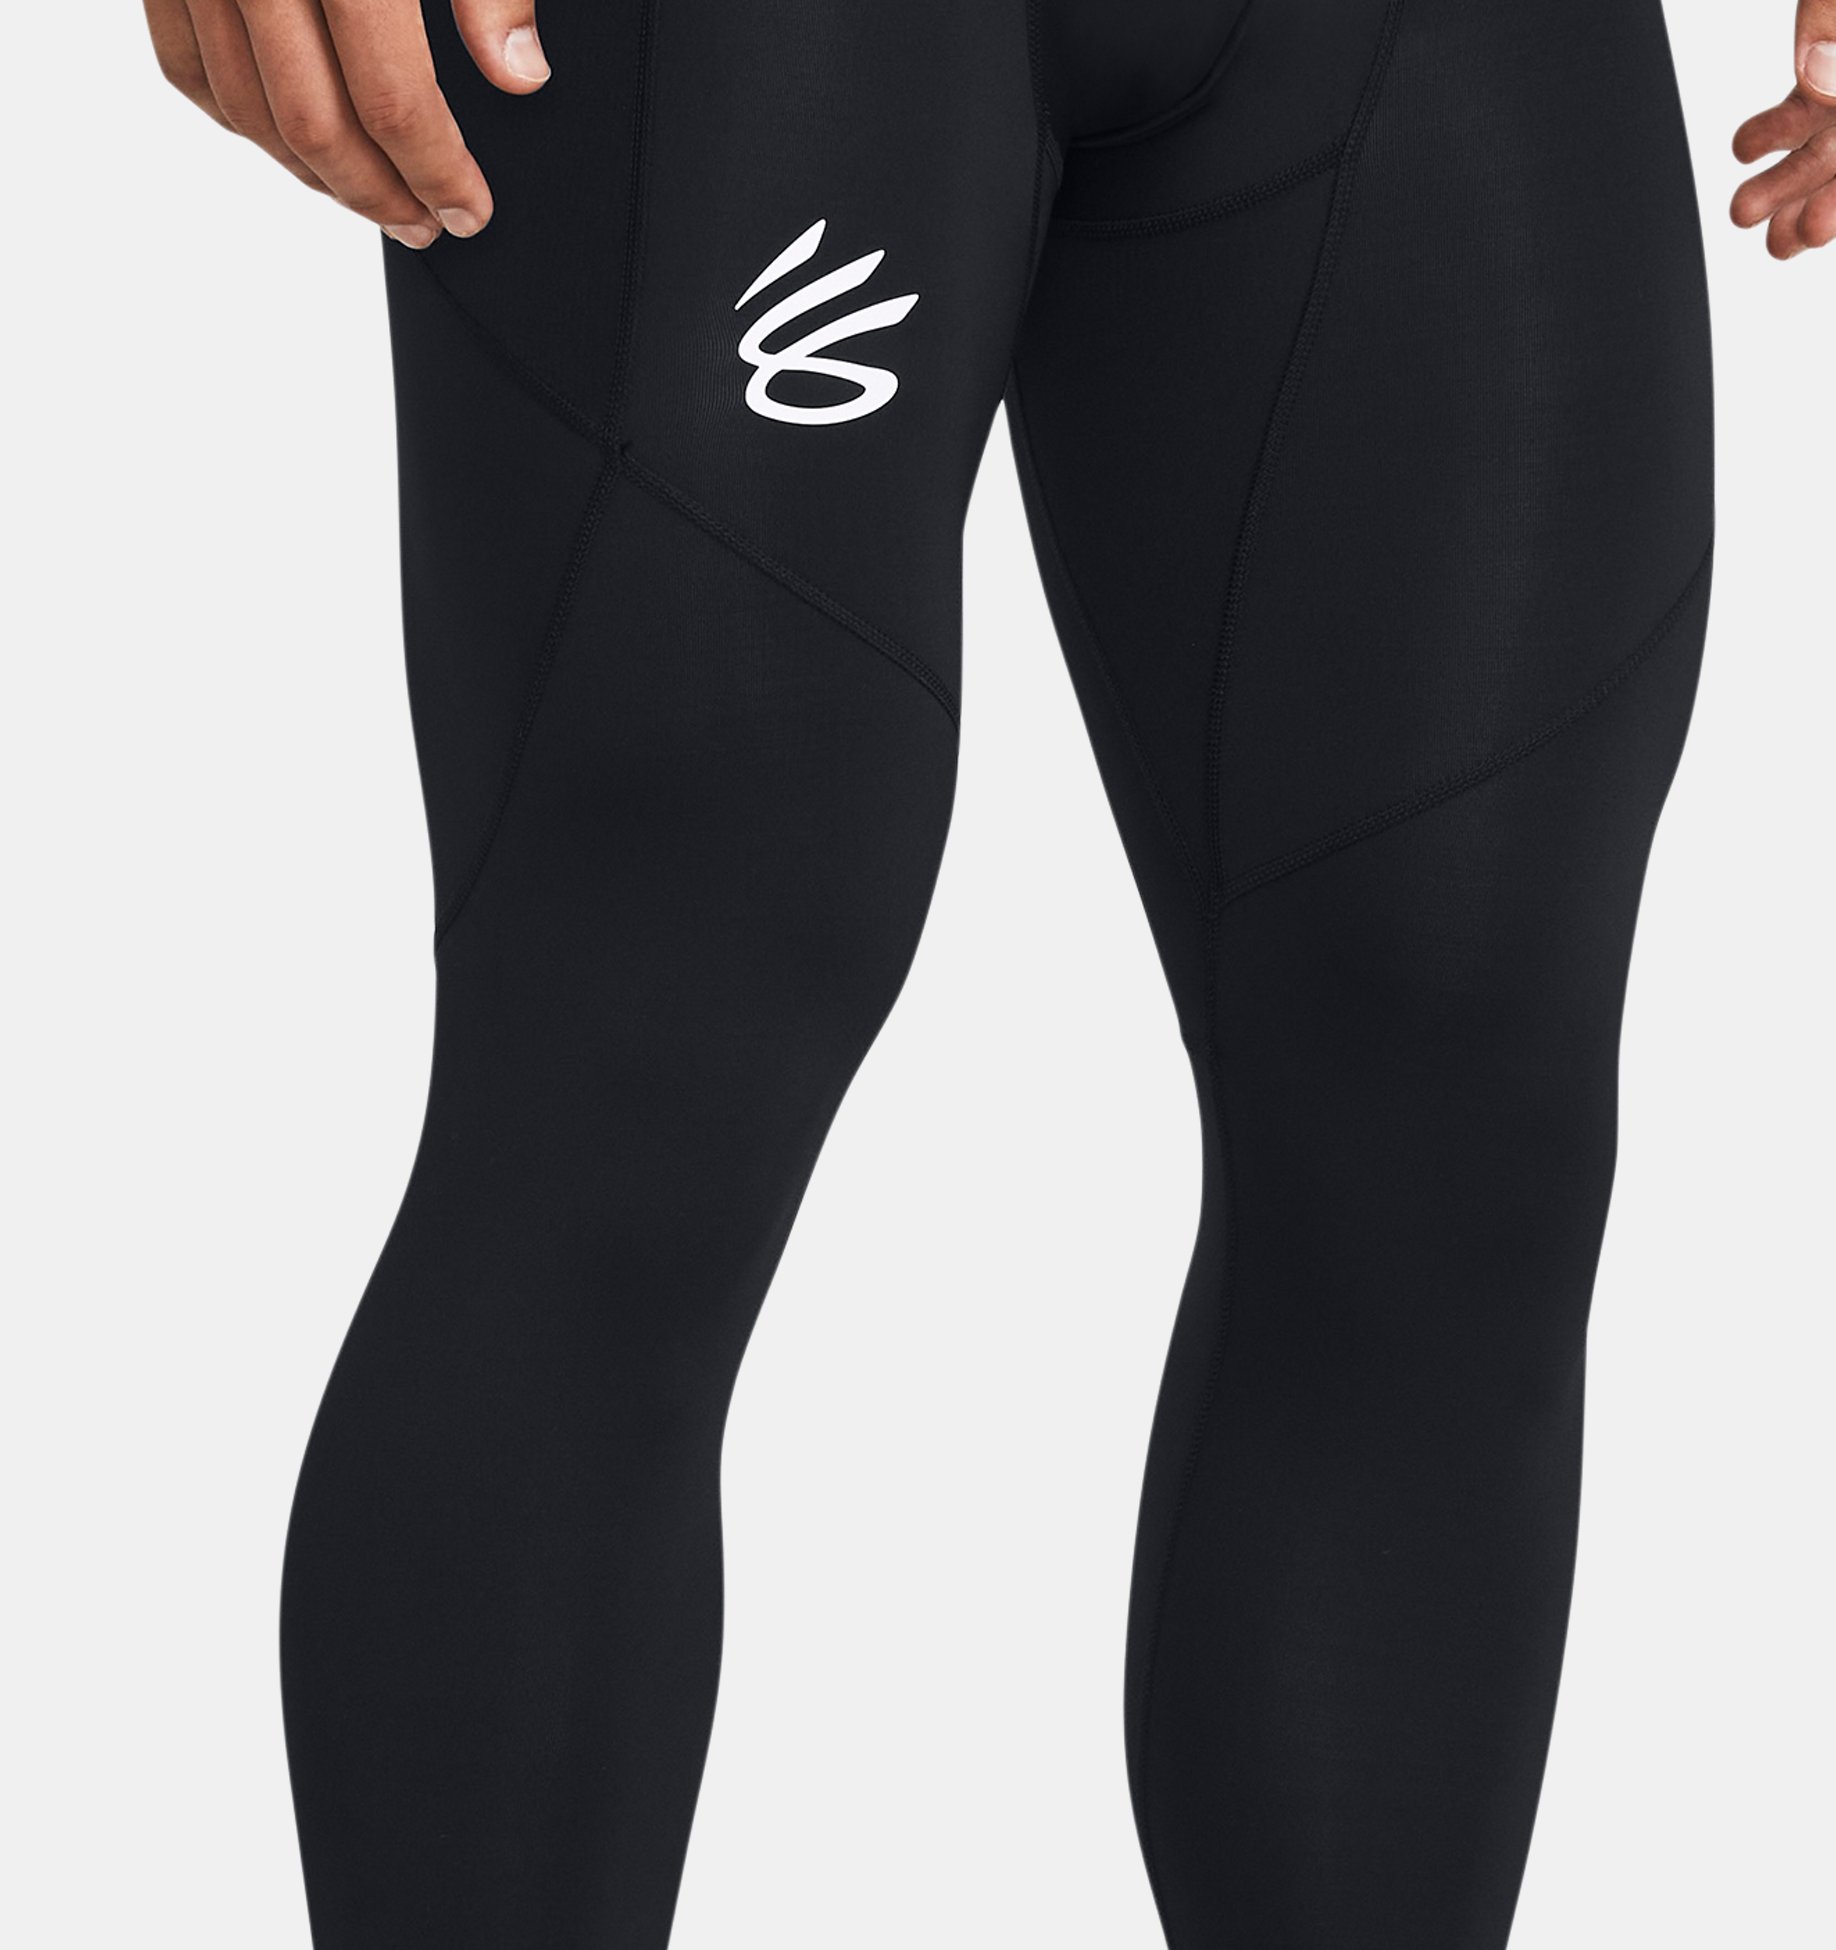 Under Armour Curry UNDRTD 3/4 Compression Tights Black/White 1362586-001 -  Free Shipping at LASC